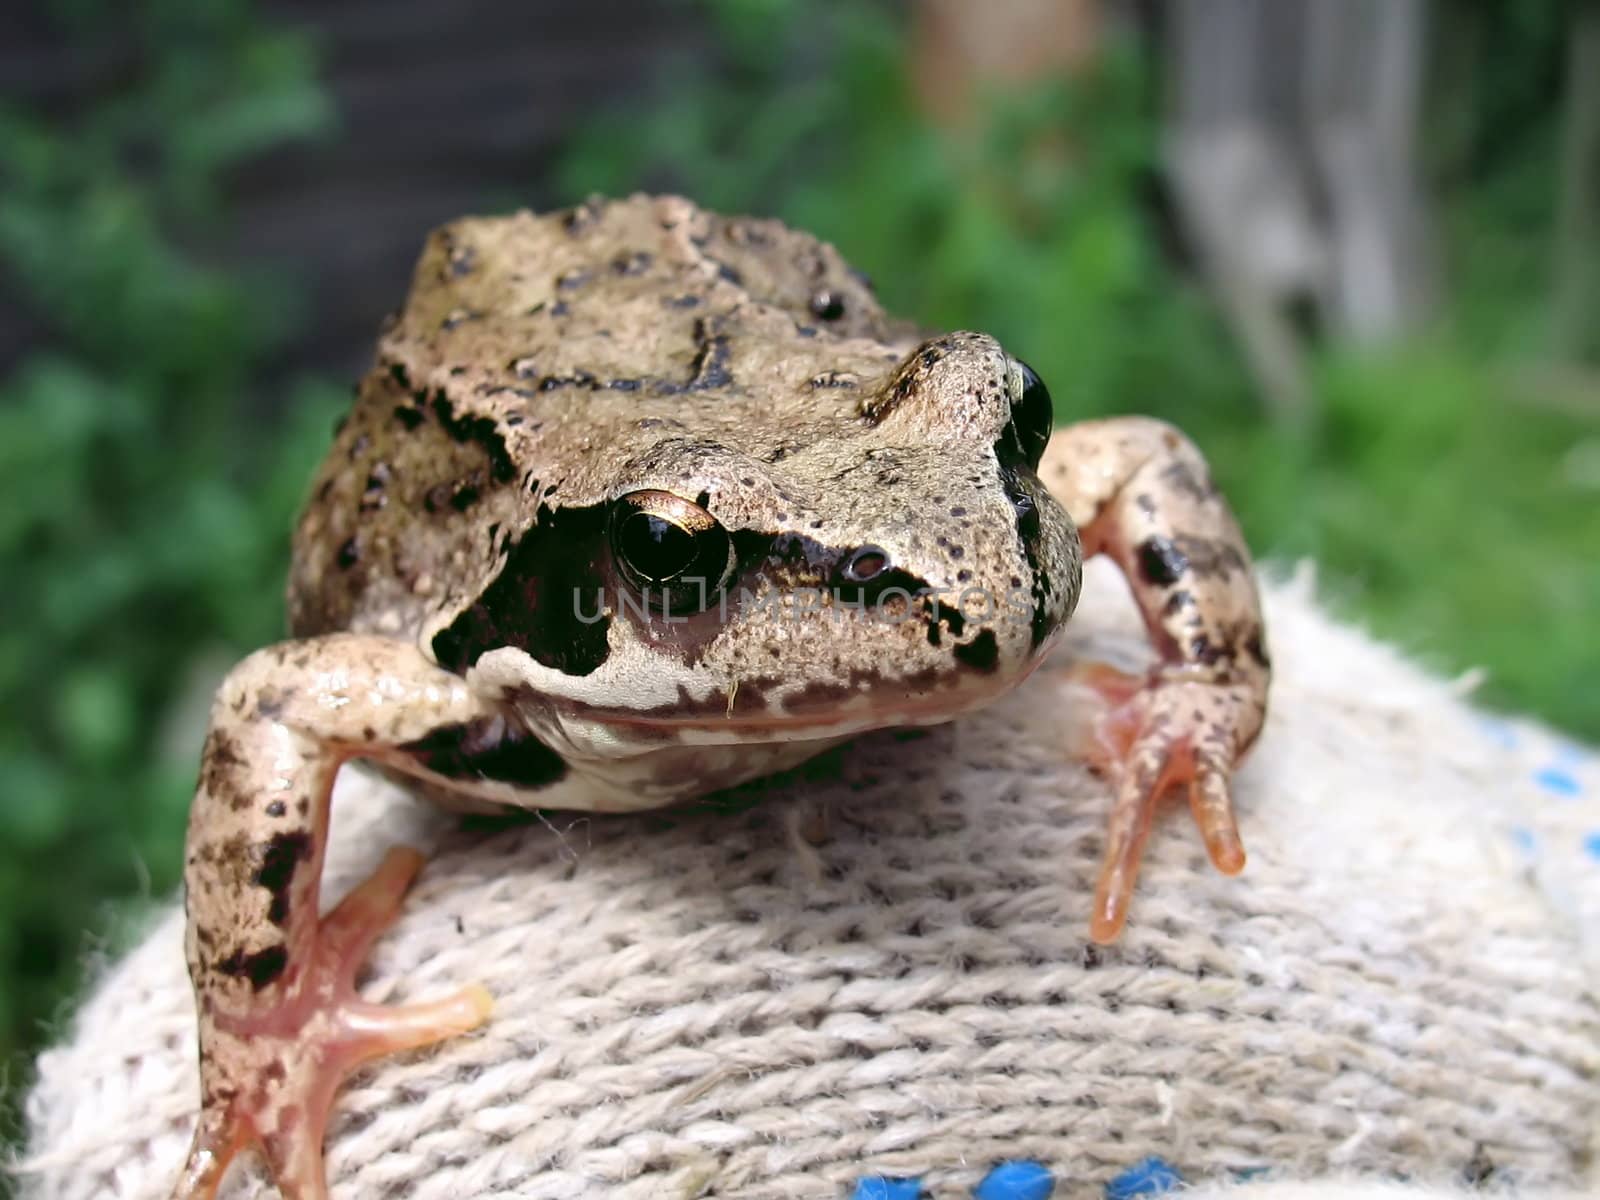 Small frog on a hand of the farmer